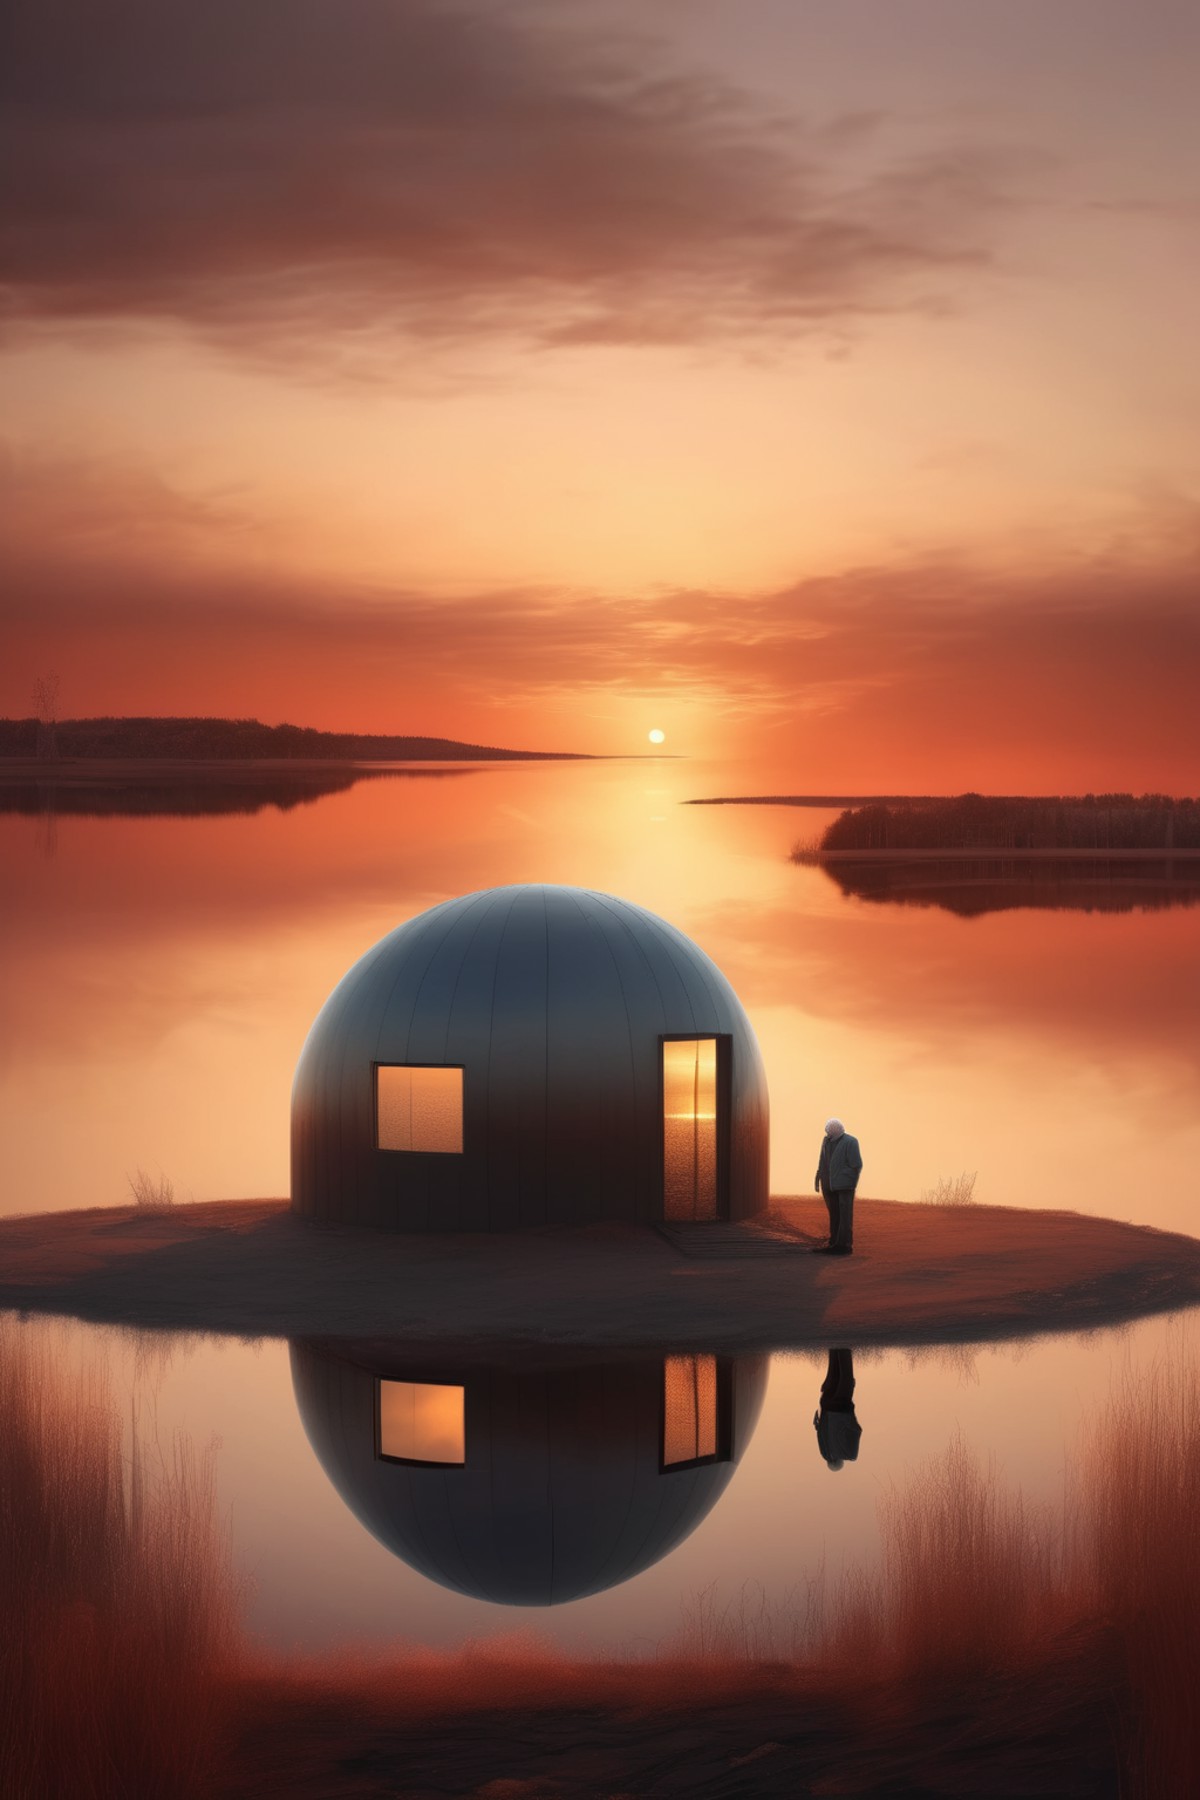 <lora:Erik Johansson Style:1>Erik Johansson Style - At sunset, on the surface of Lake Belga, there is a small building wit...